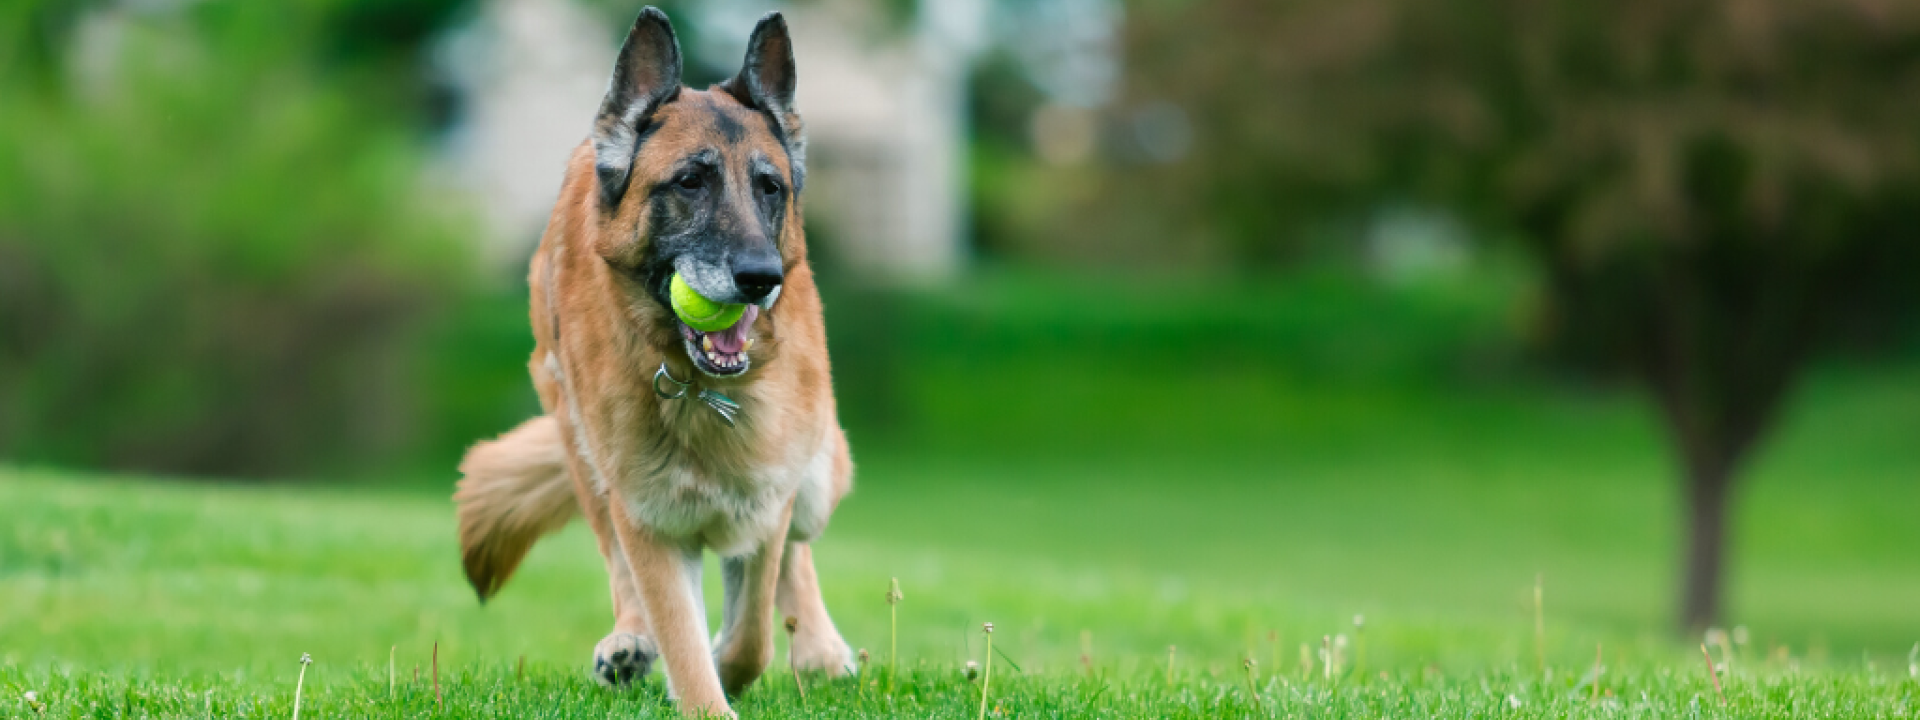 Old purebred German Shepherd Dog outside in grass.